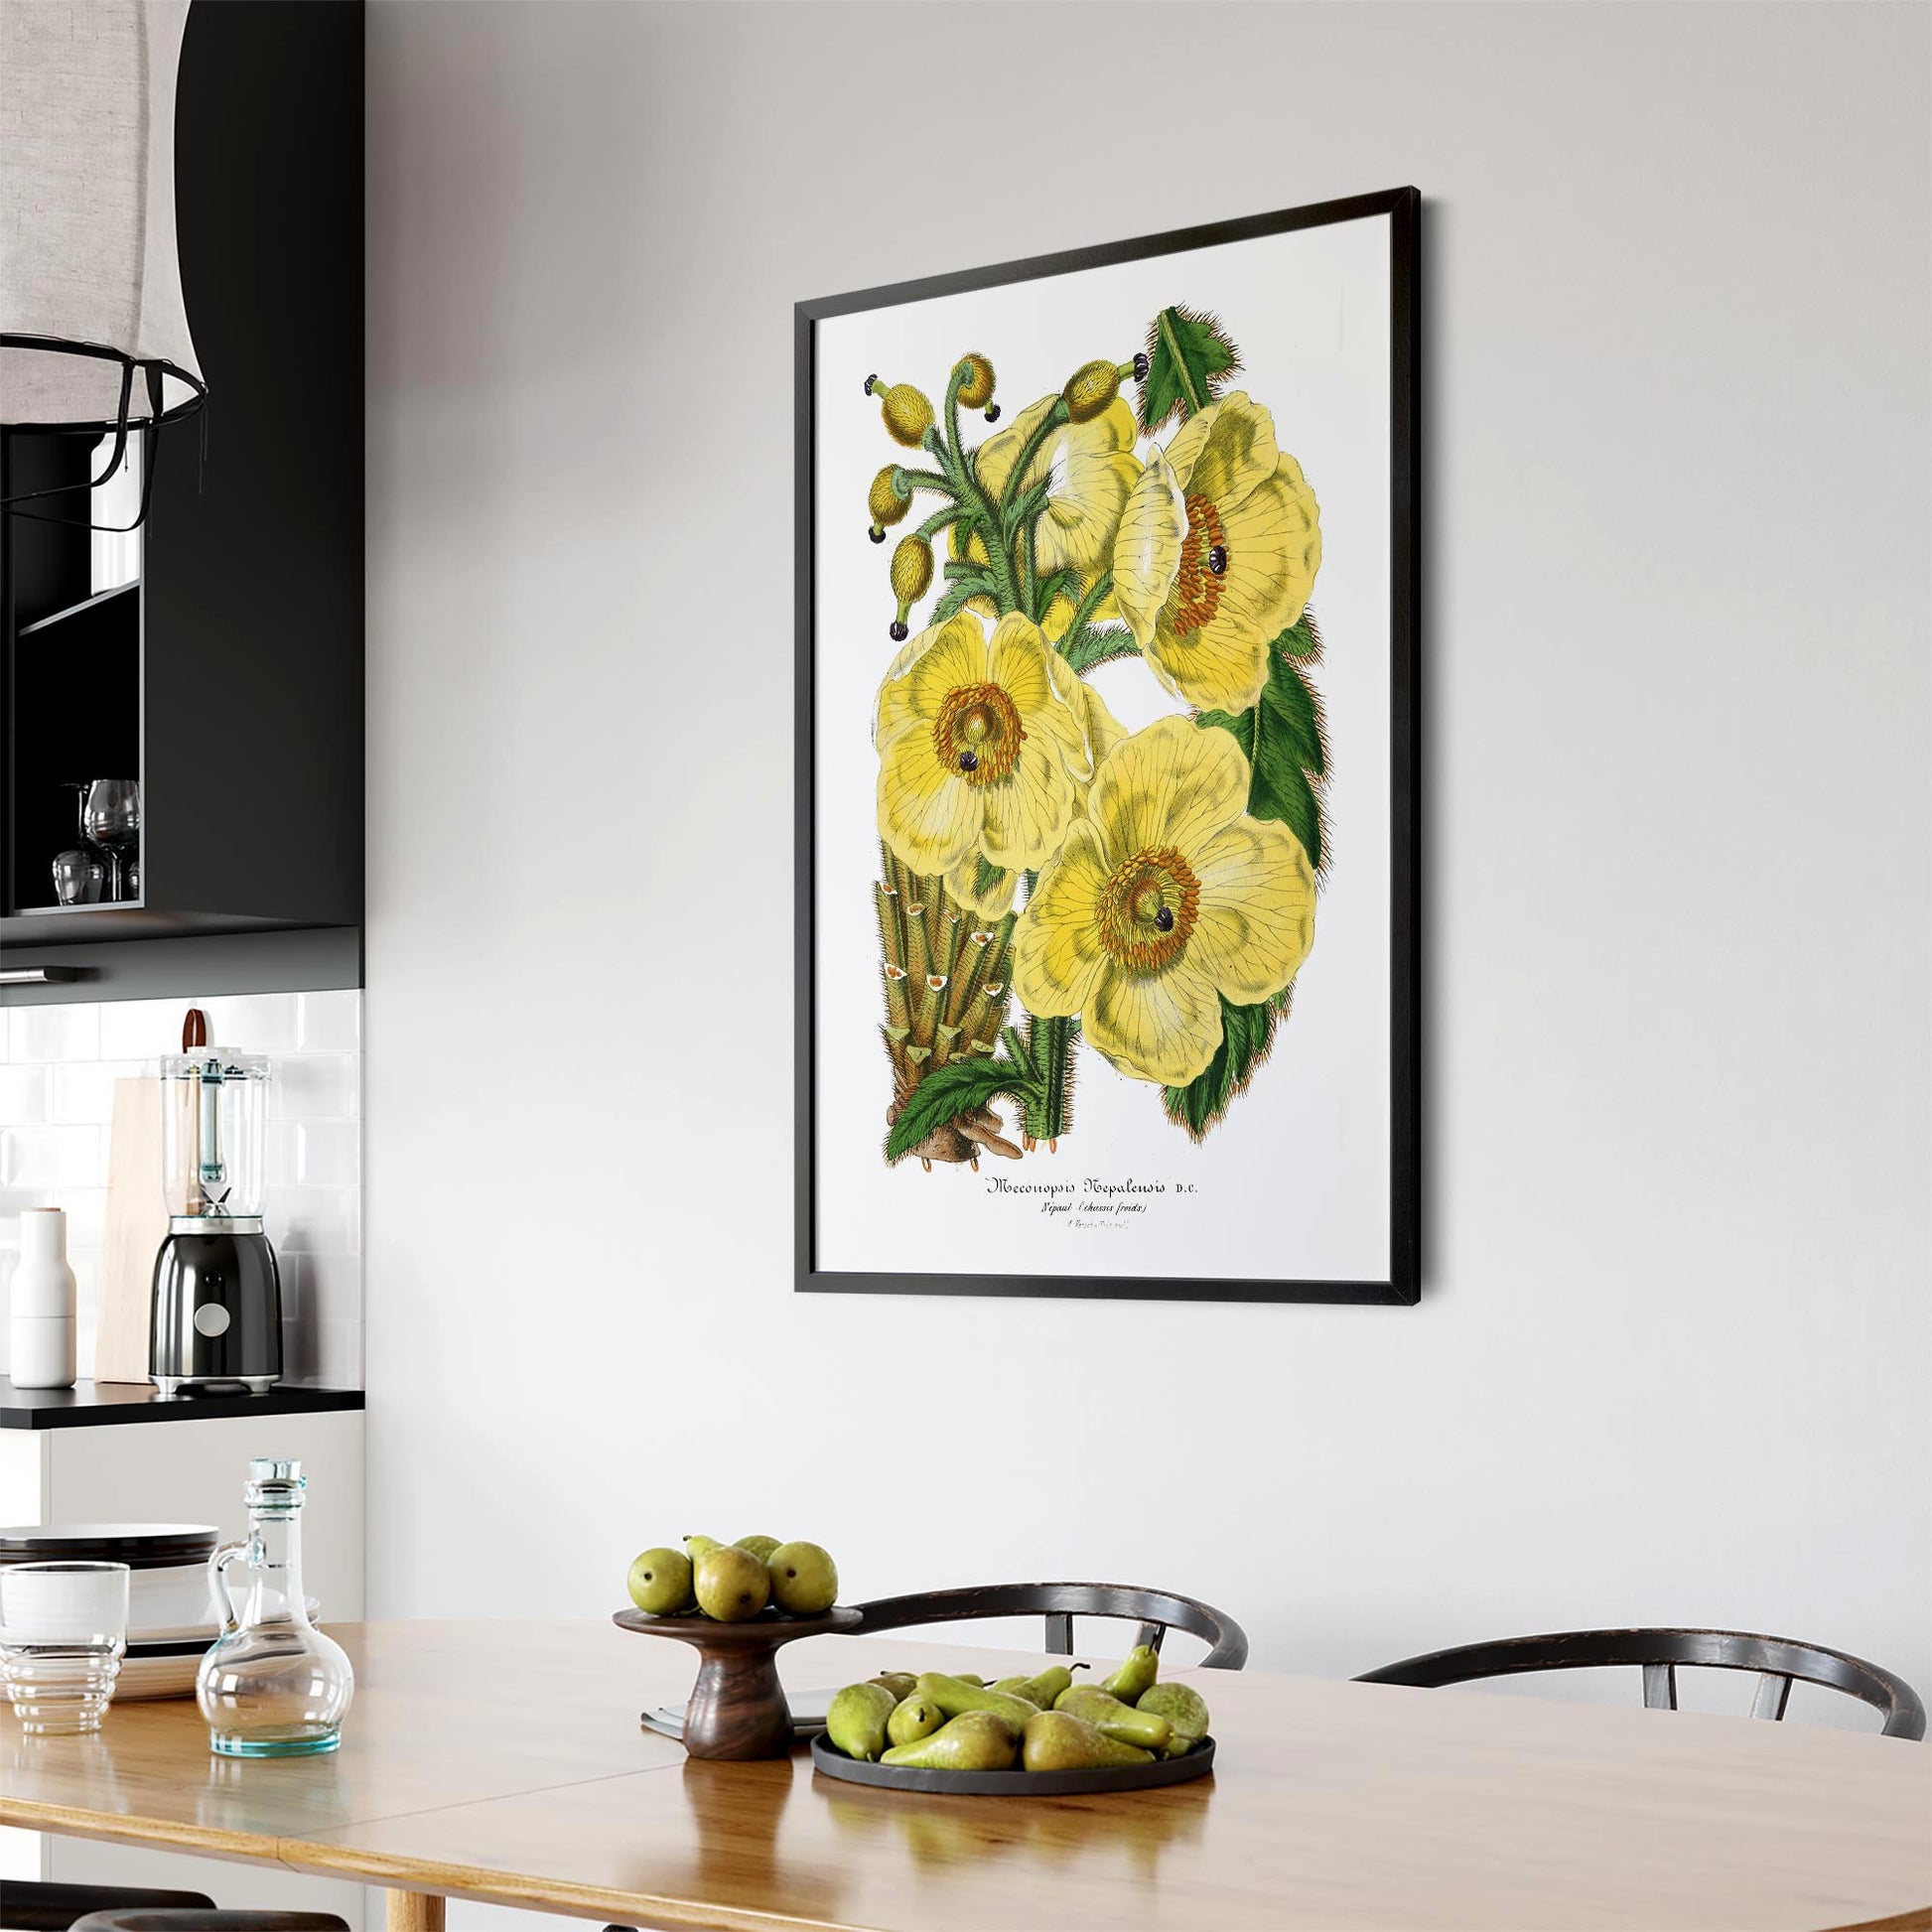 Yellow Flower Vintage Botanical Kitchen Wall Art #3 - The Affordable Art Company